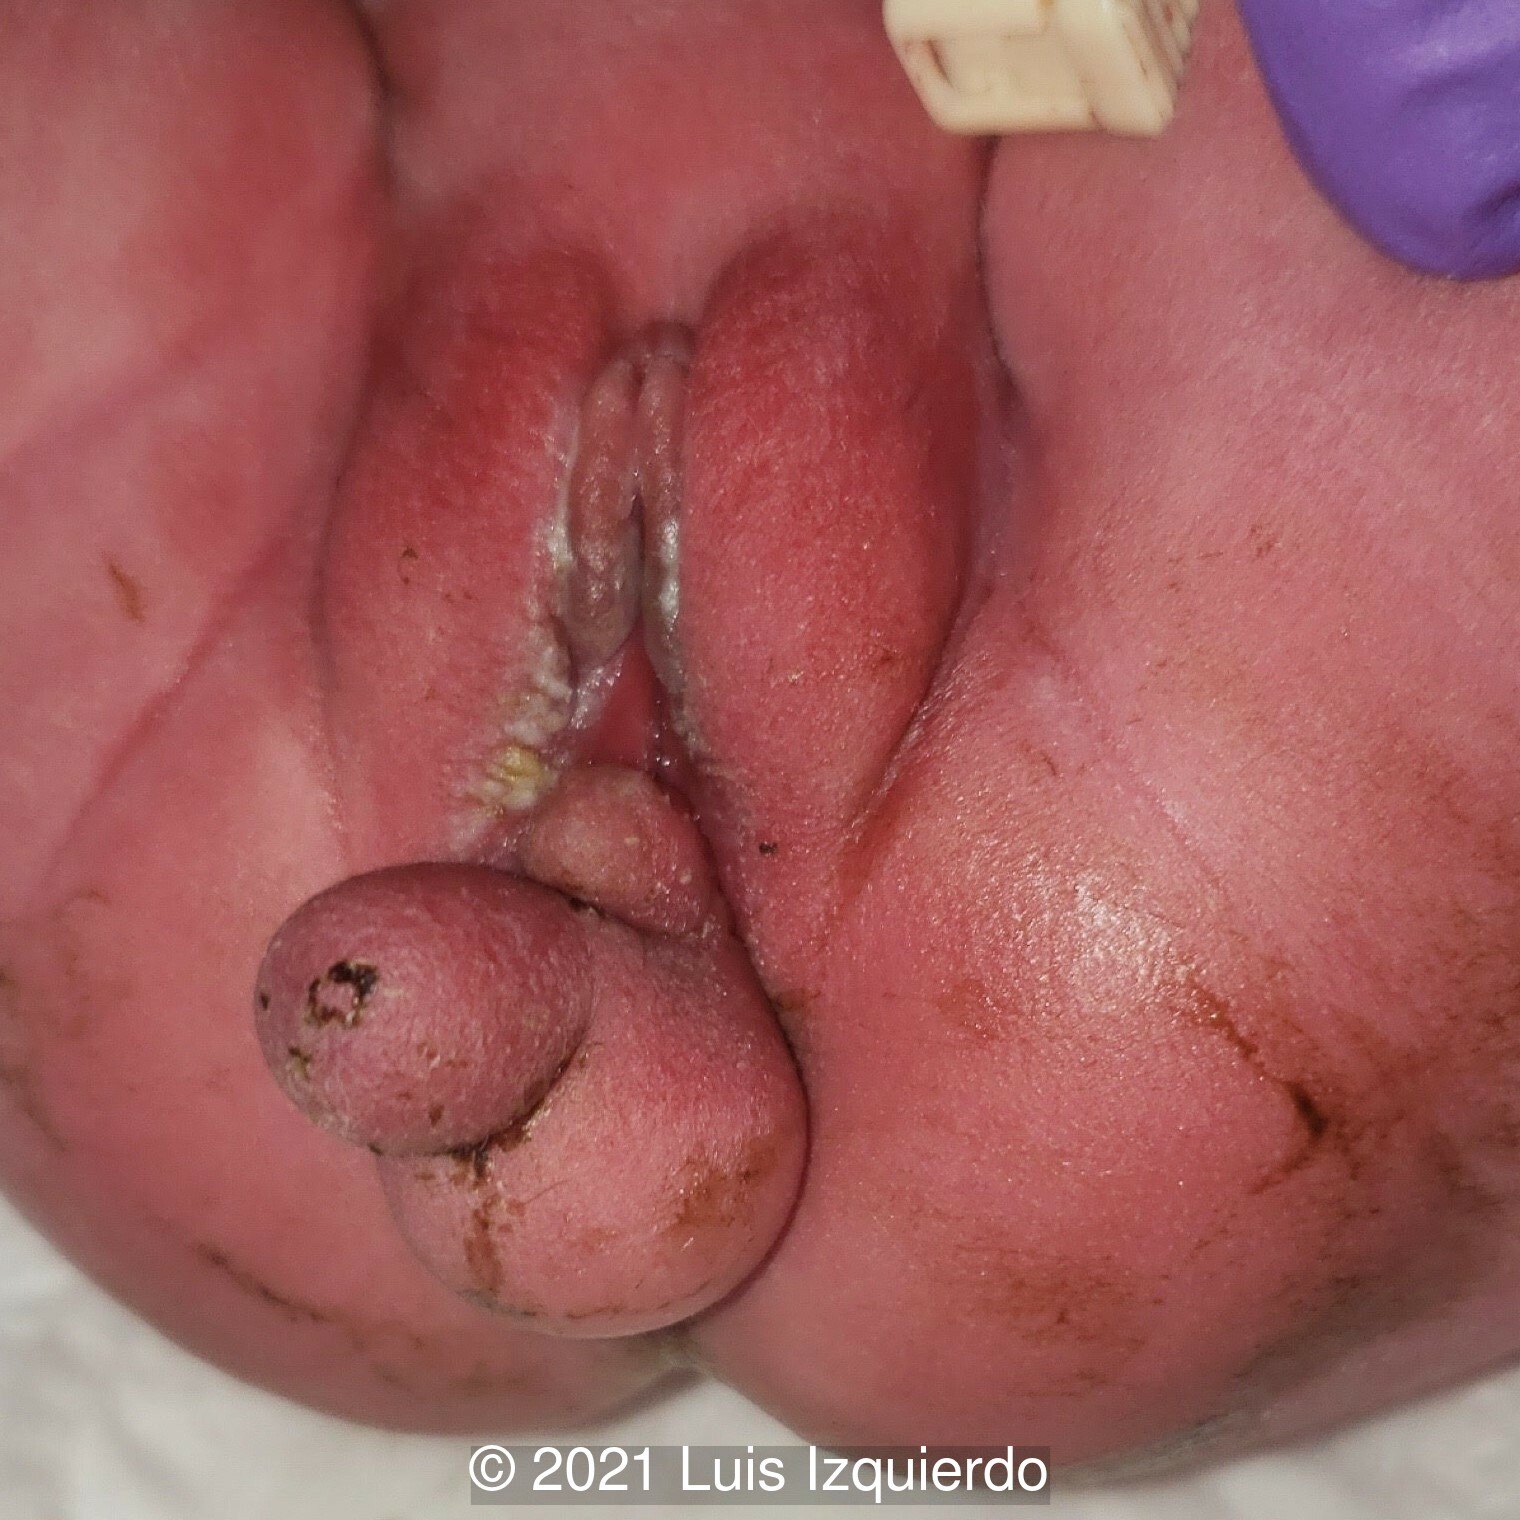 Pre-operative image of the perineal mass.